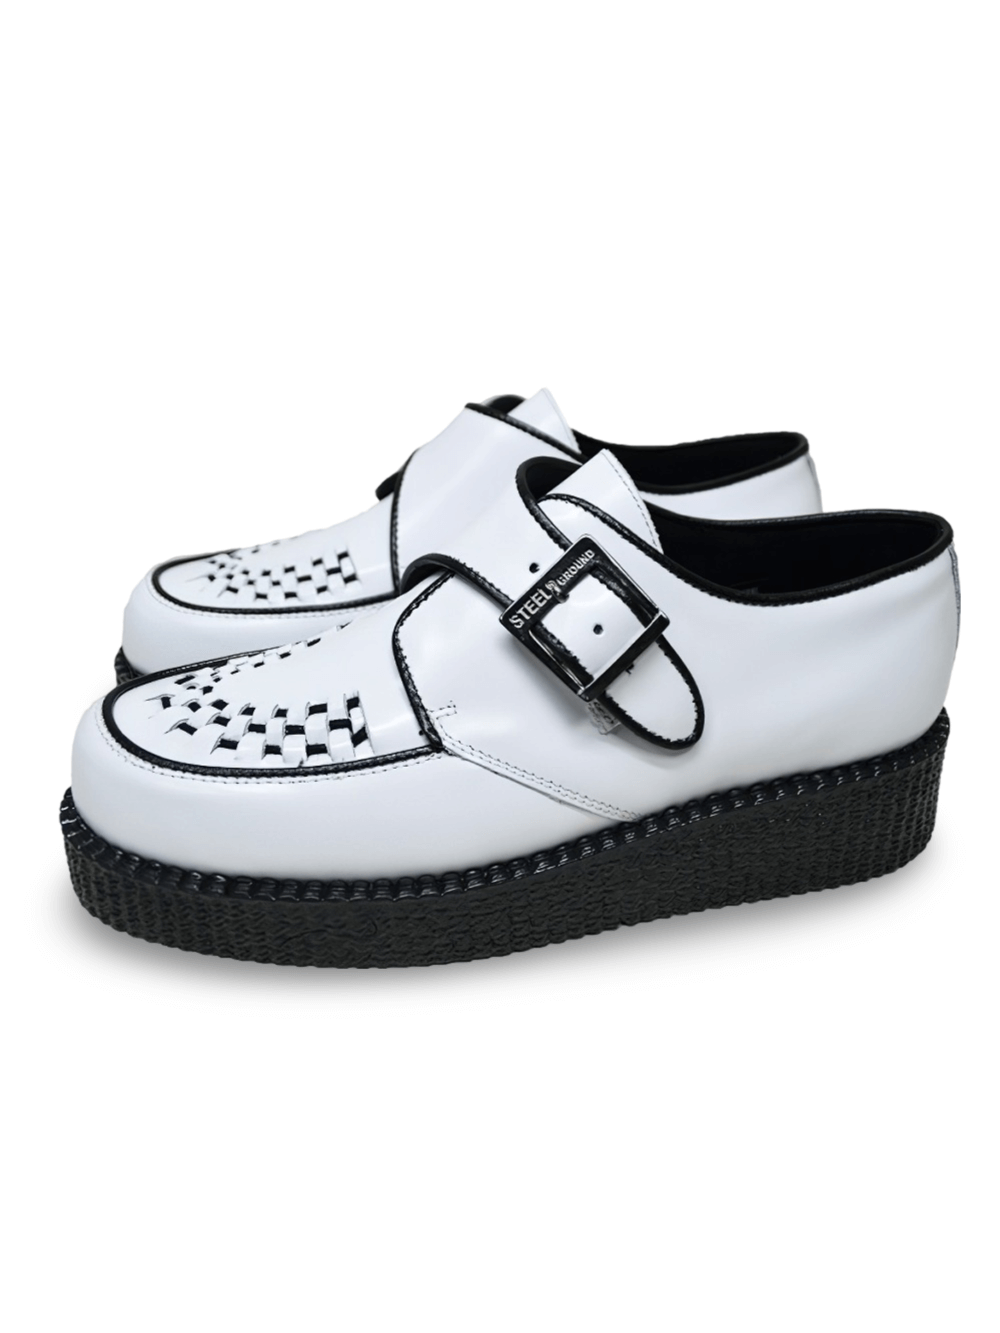 Creepers unisexes blanches avec boucle et bout rond